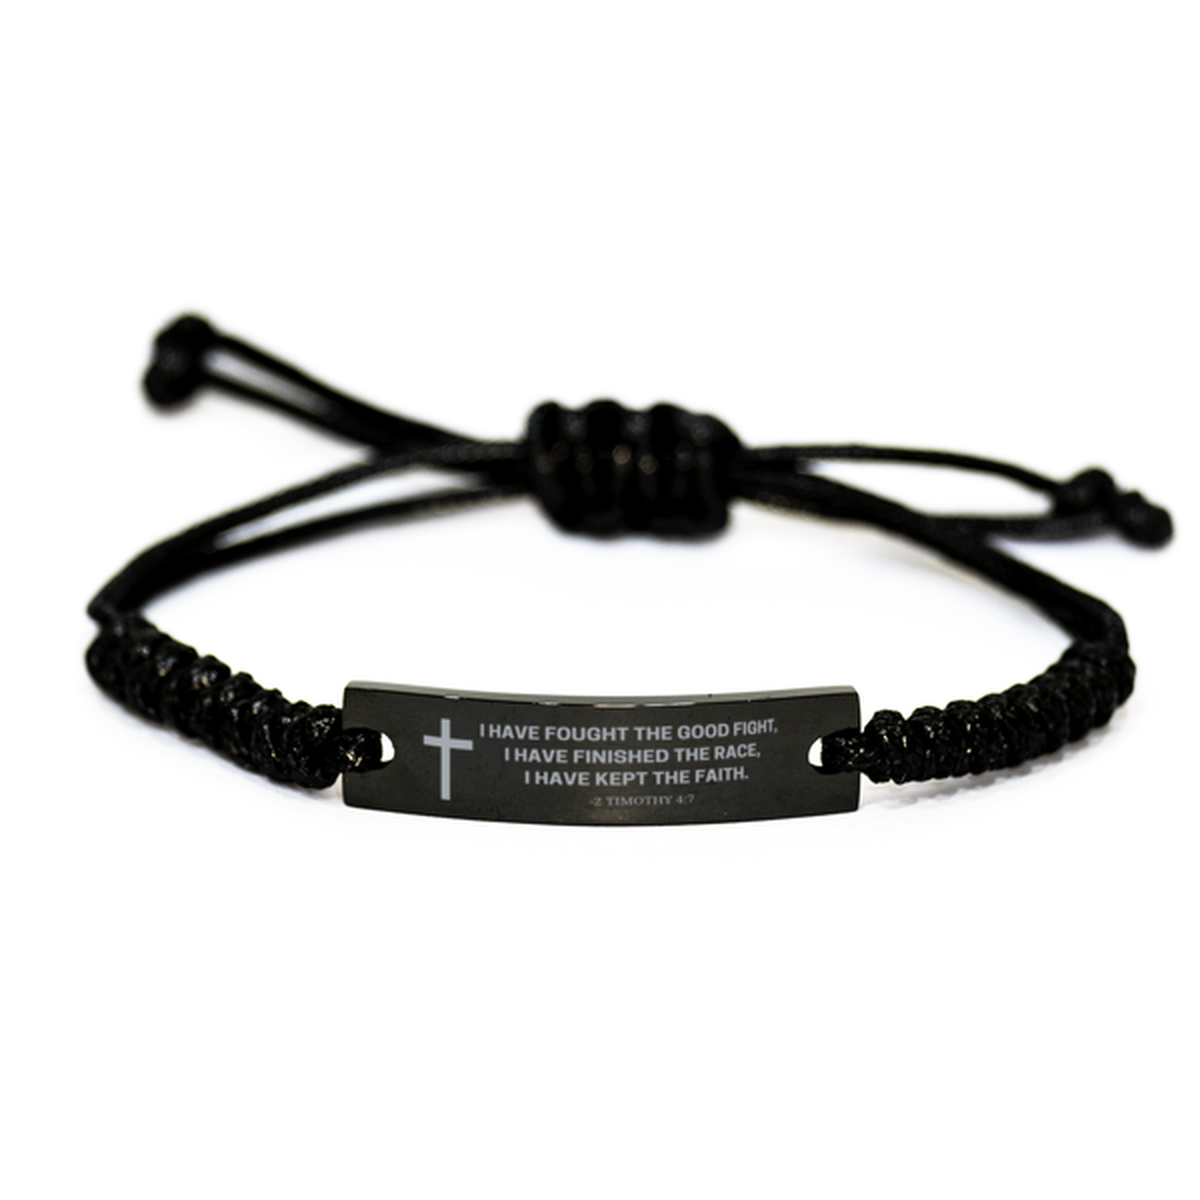 Baptism Gifts For Teenage Boys Girls, Christian Bible Verse Black Rope Bracelet, I have fought the good fight, Catholic Confirmation Gifts for Son, Godson, Grandson, Nephew